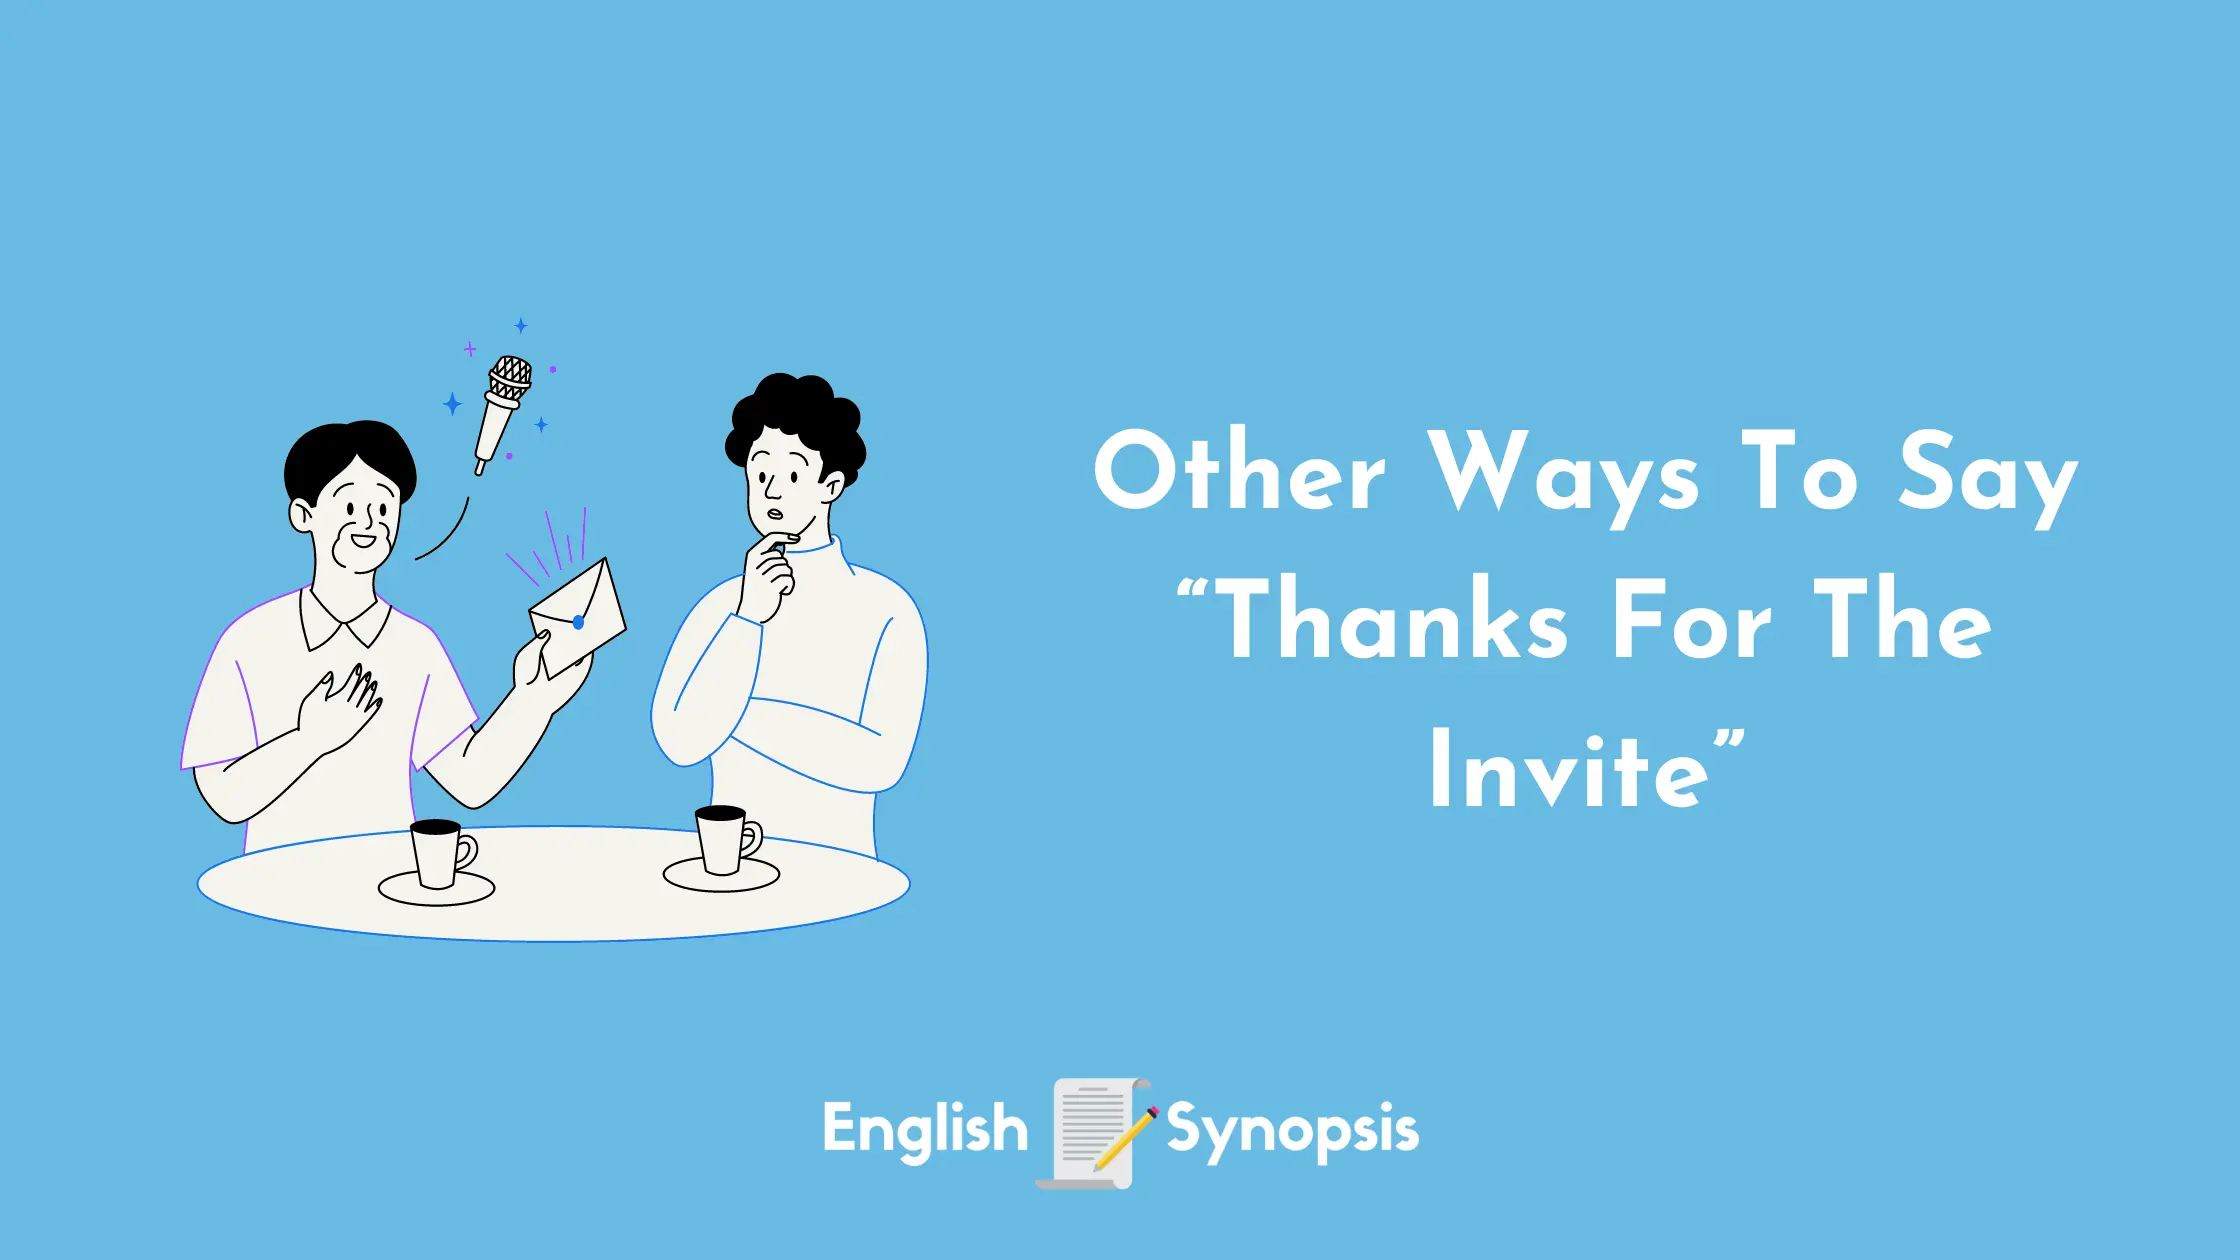 Other Ways To Say “Thanks For The Invite”